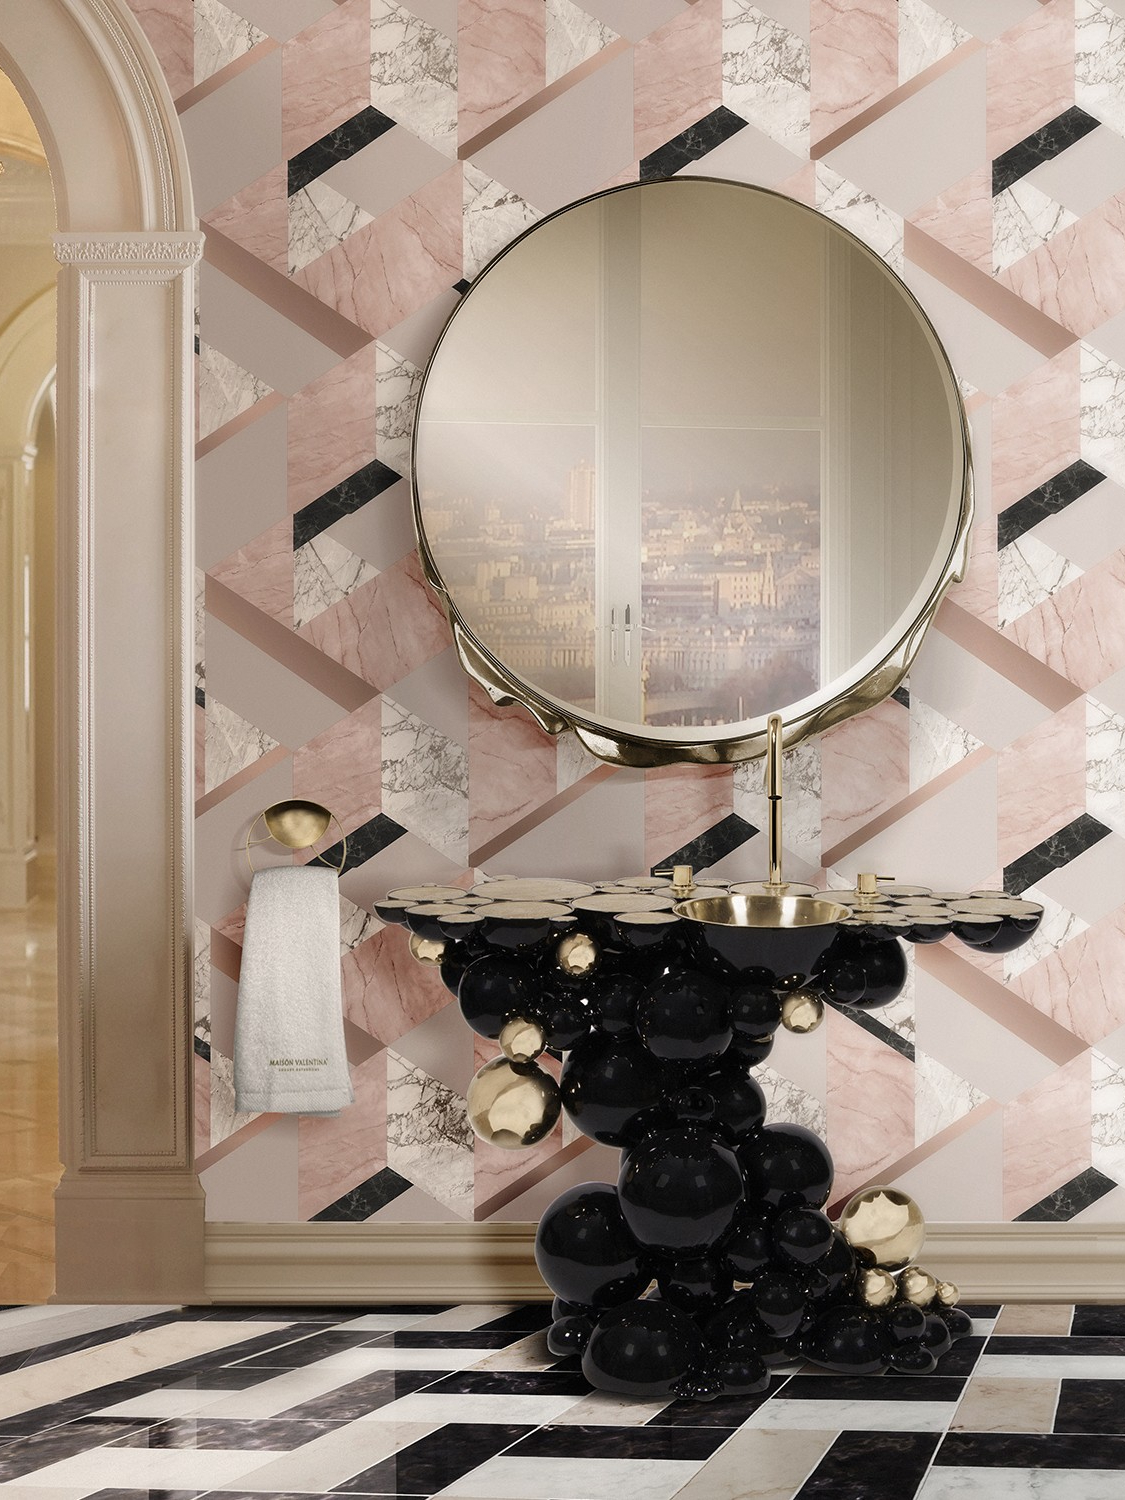 Luxury Bathroom Design With Black And Gold And Pink Tones - Home'Society